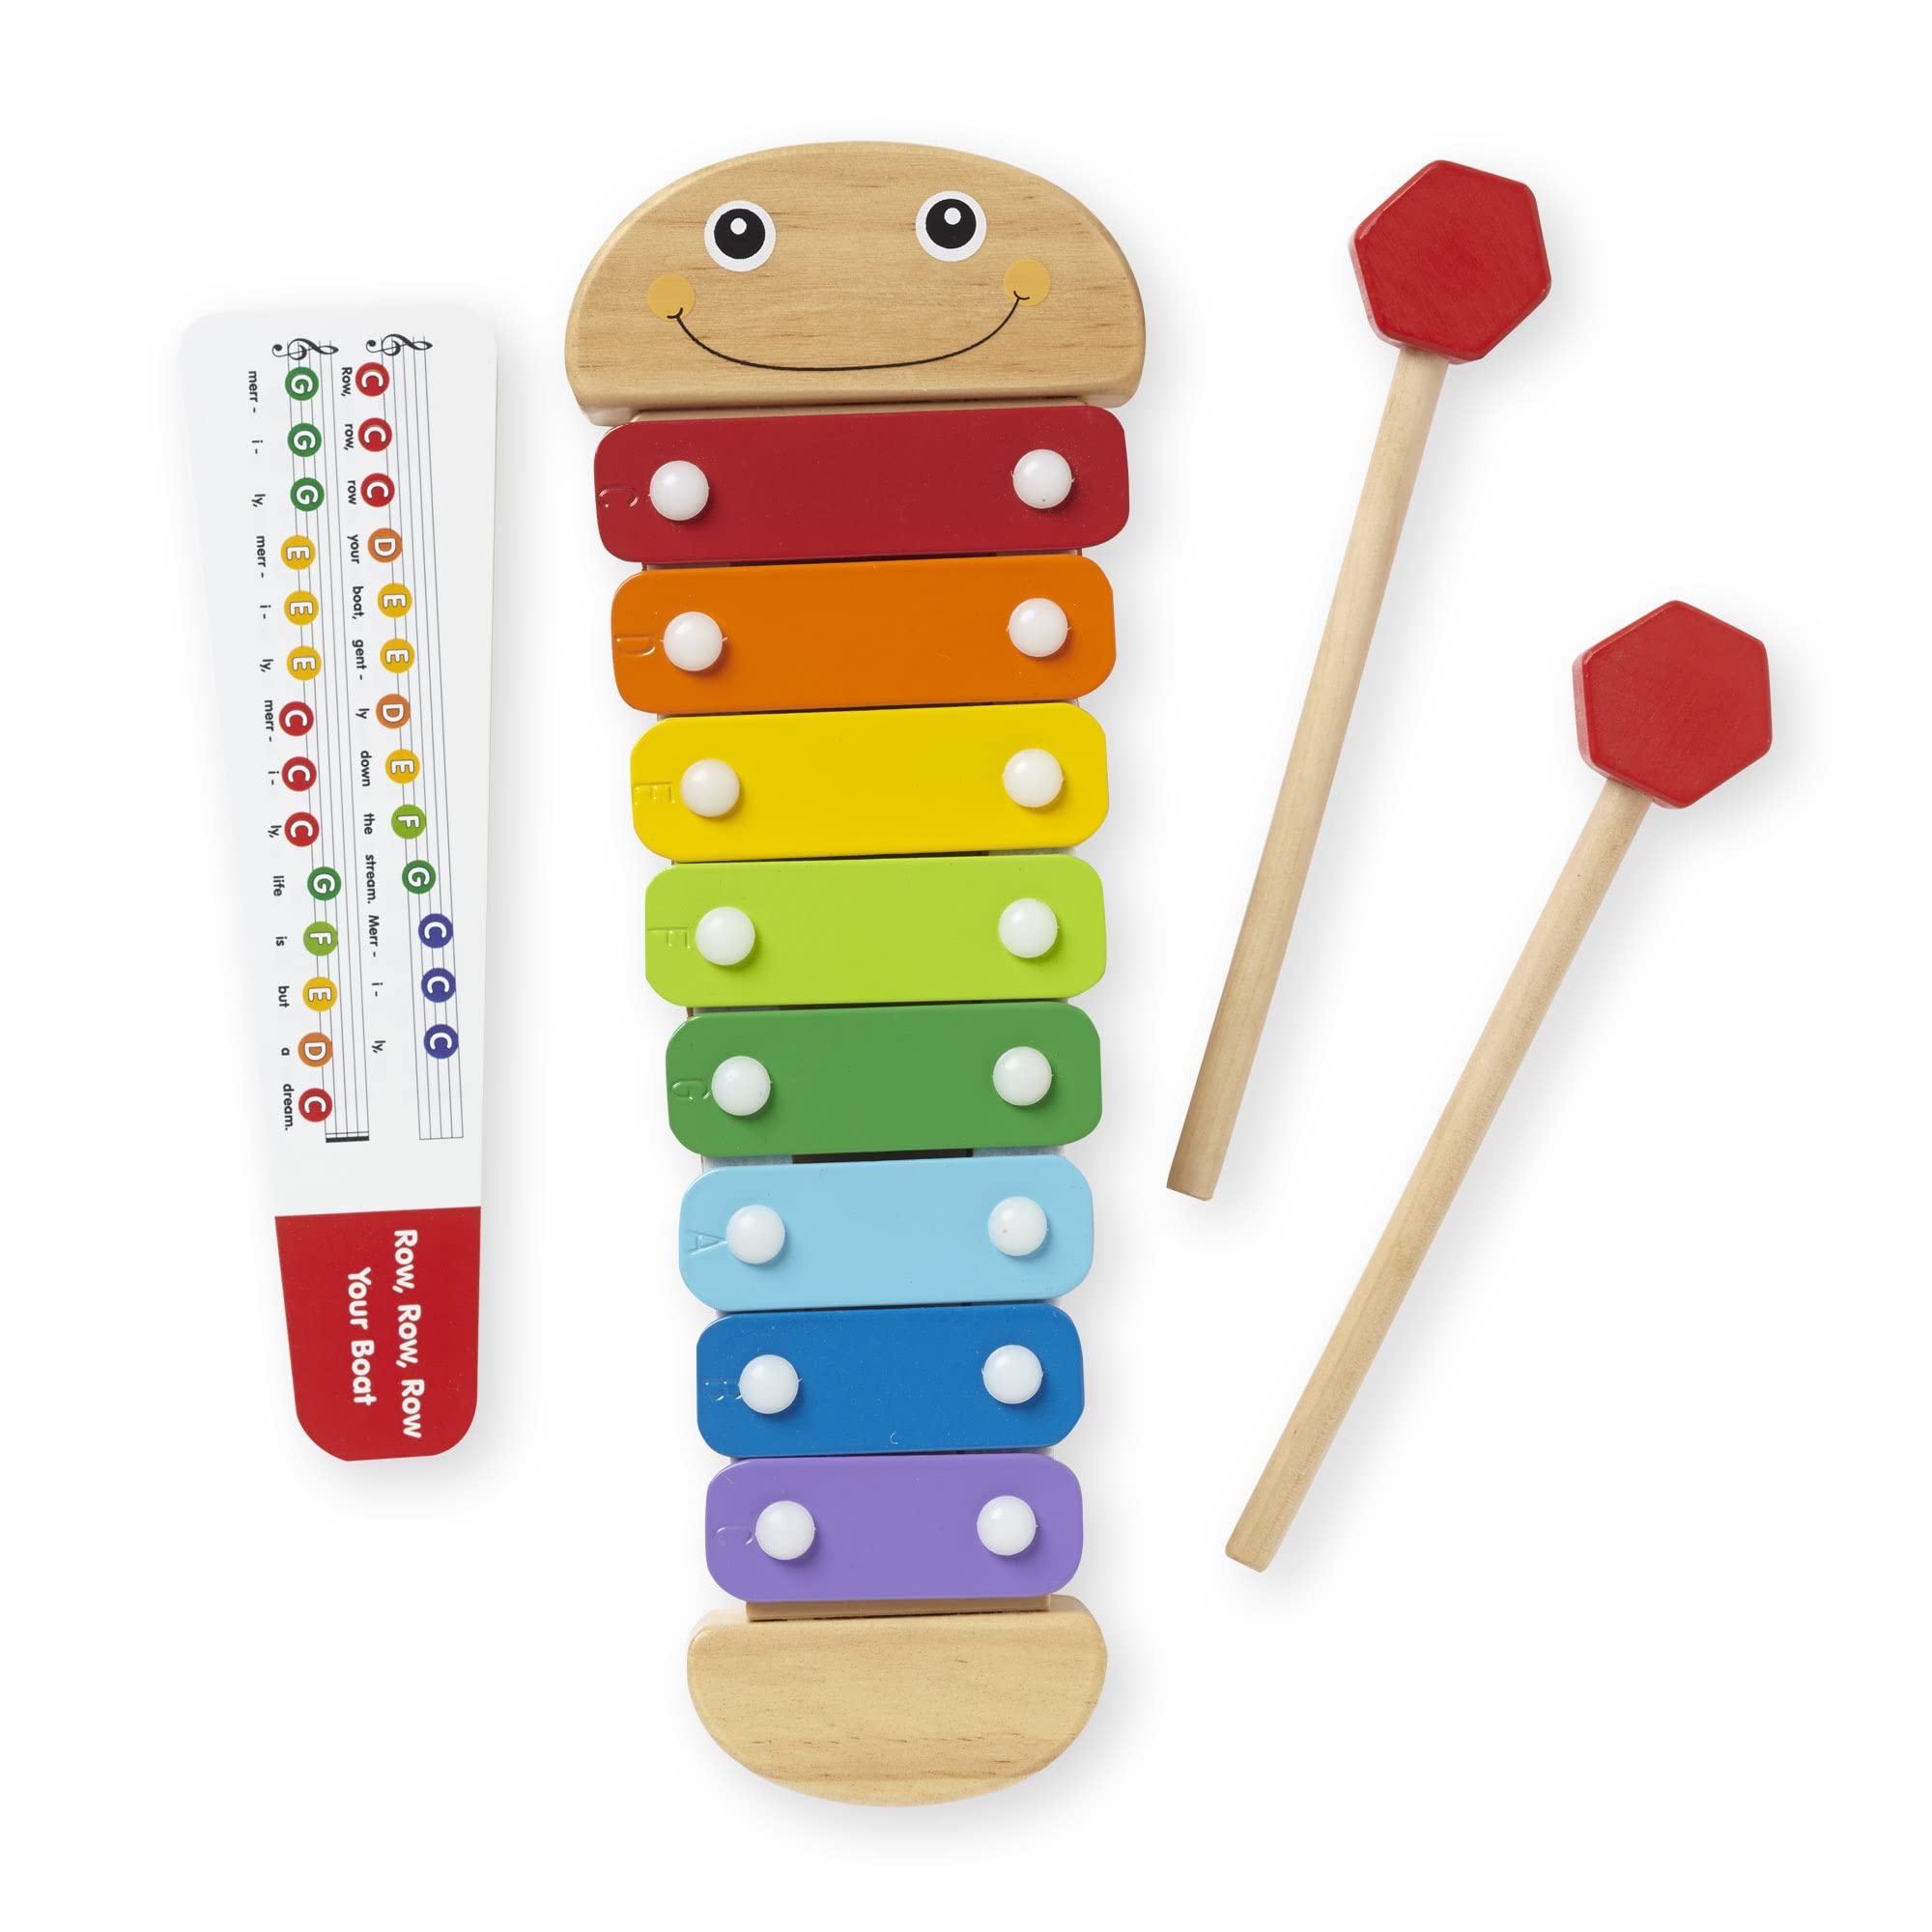 Melissa & Doug Caterpillar Xylophone Musical Toy With Wooden Mallets 15.25" x 6.5" x 1.5 - For Toddlers,Ages 3+,Blue